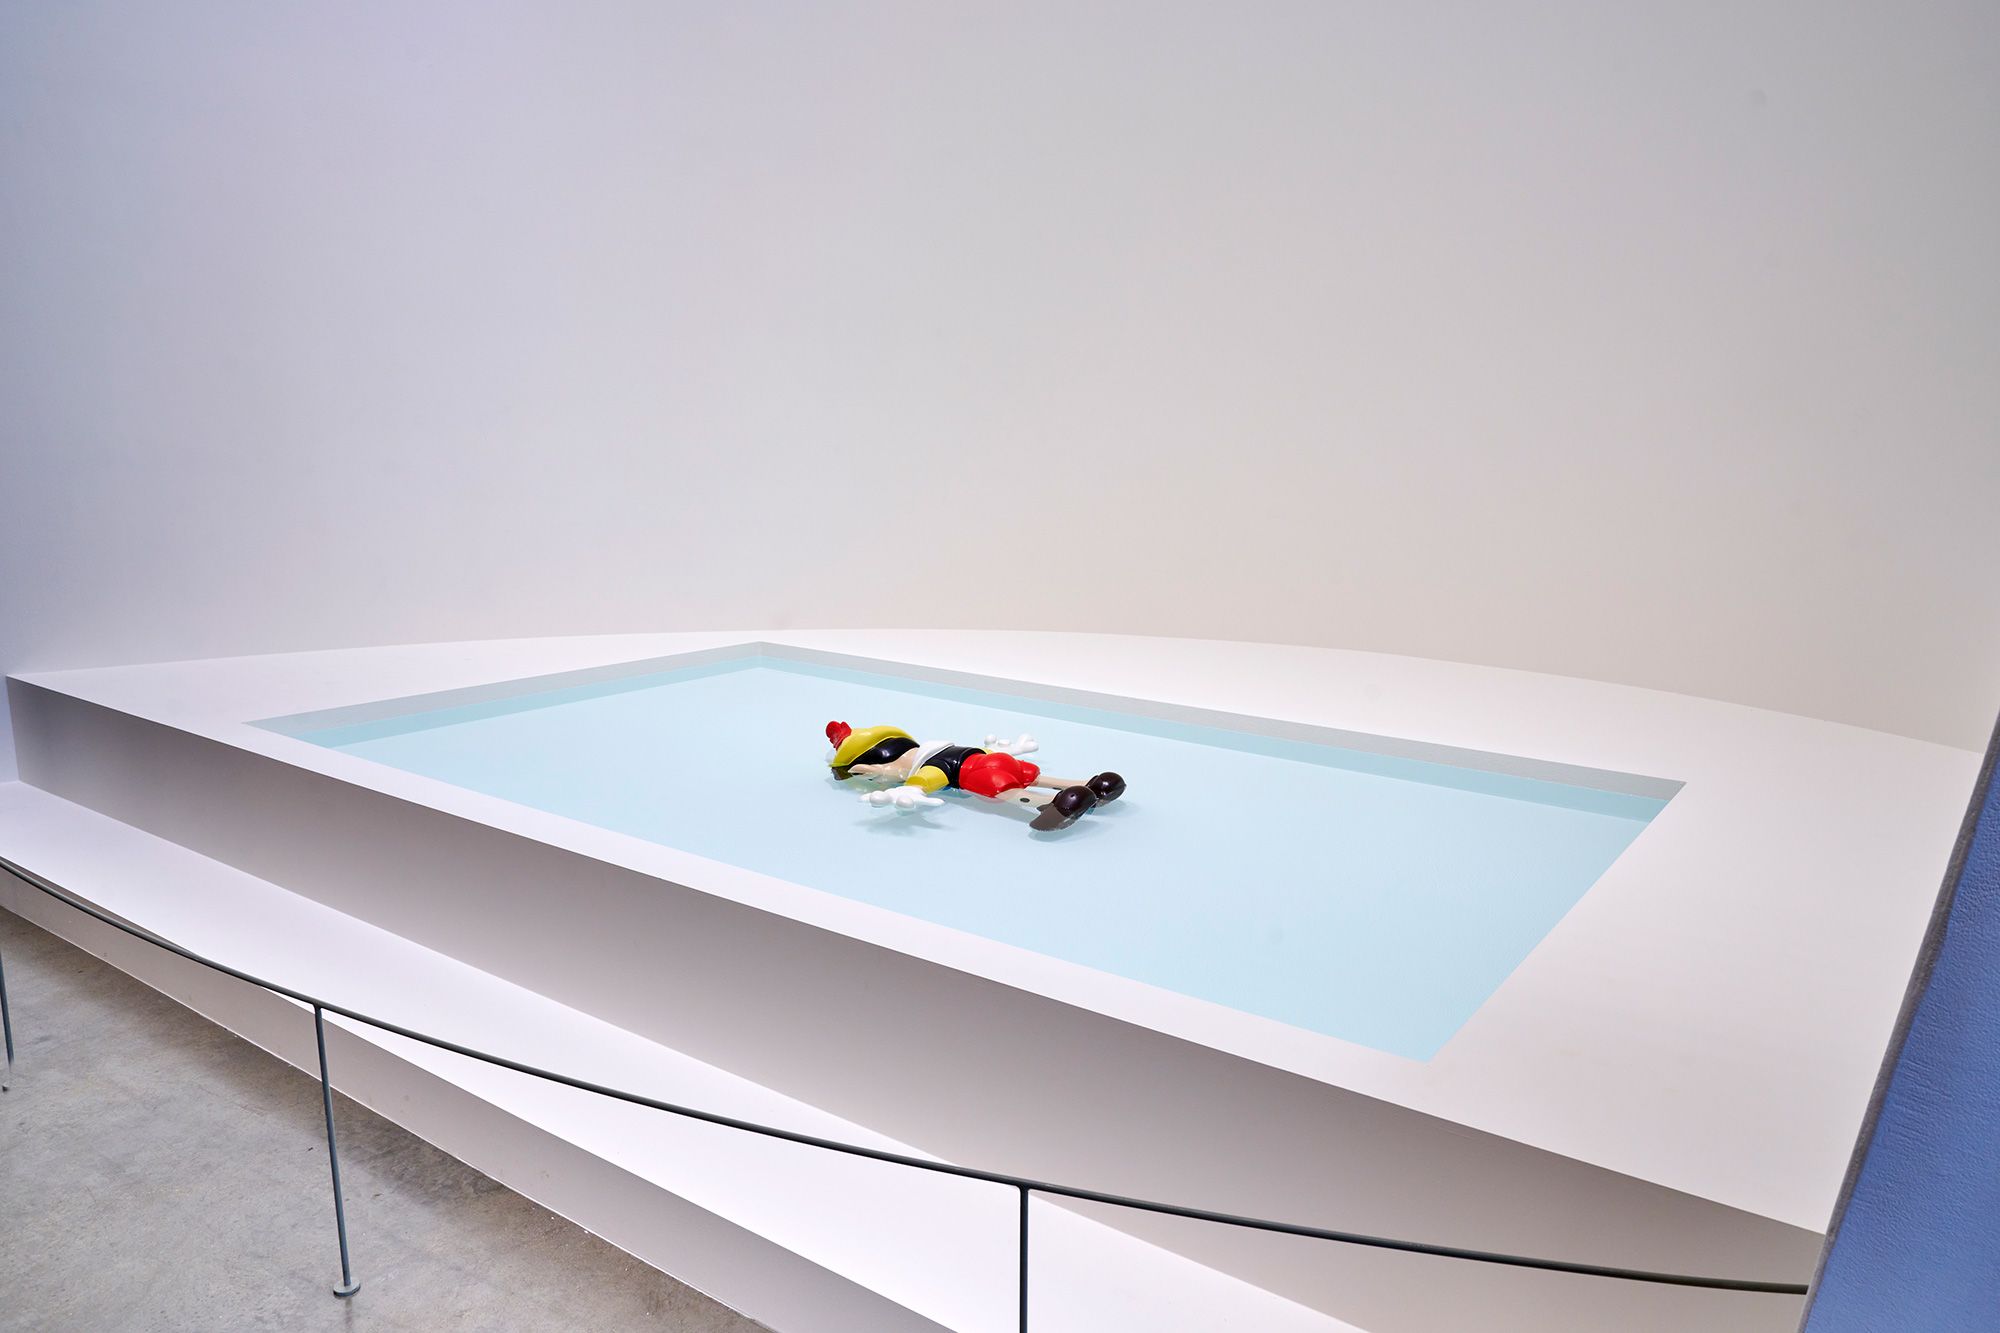 Maurizio Cattelan's bitterly comic piece "Daddy, Daddy" features a Pinnochio figure laying face down in a pool.